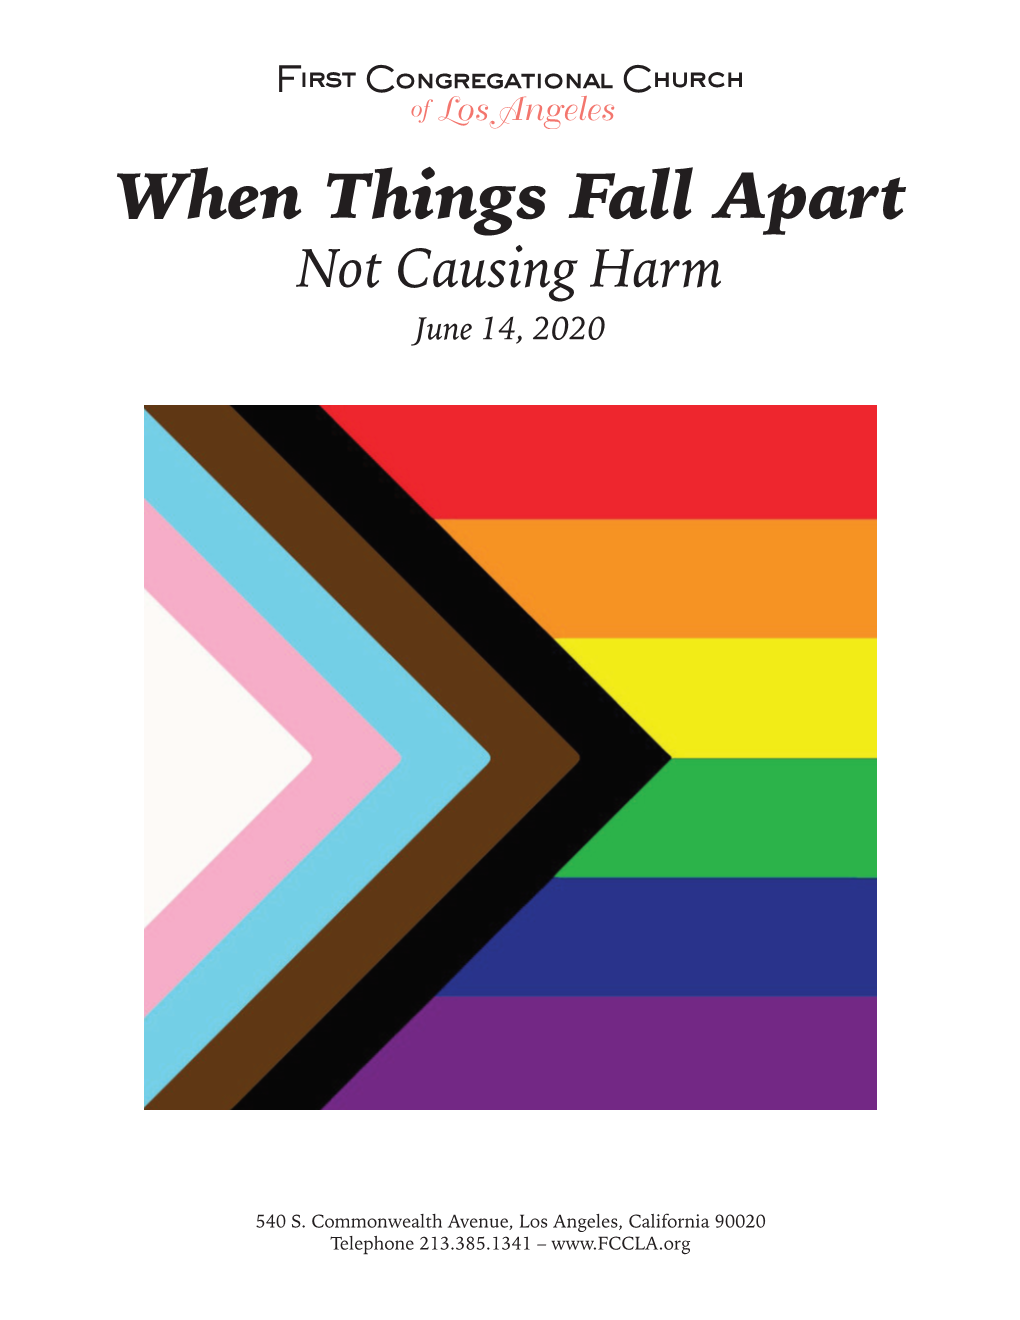 When Things Fall Apart Not Causing Harm June 14, 2020